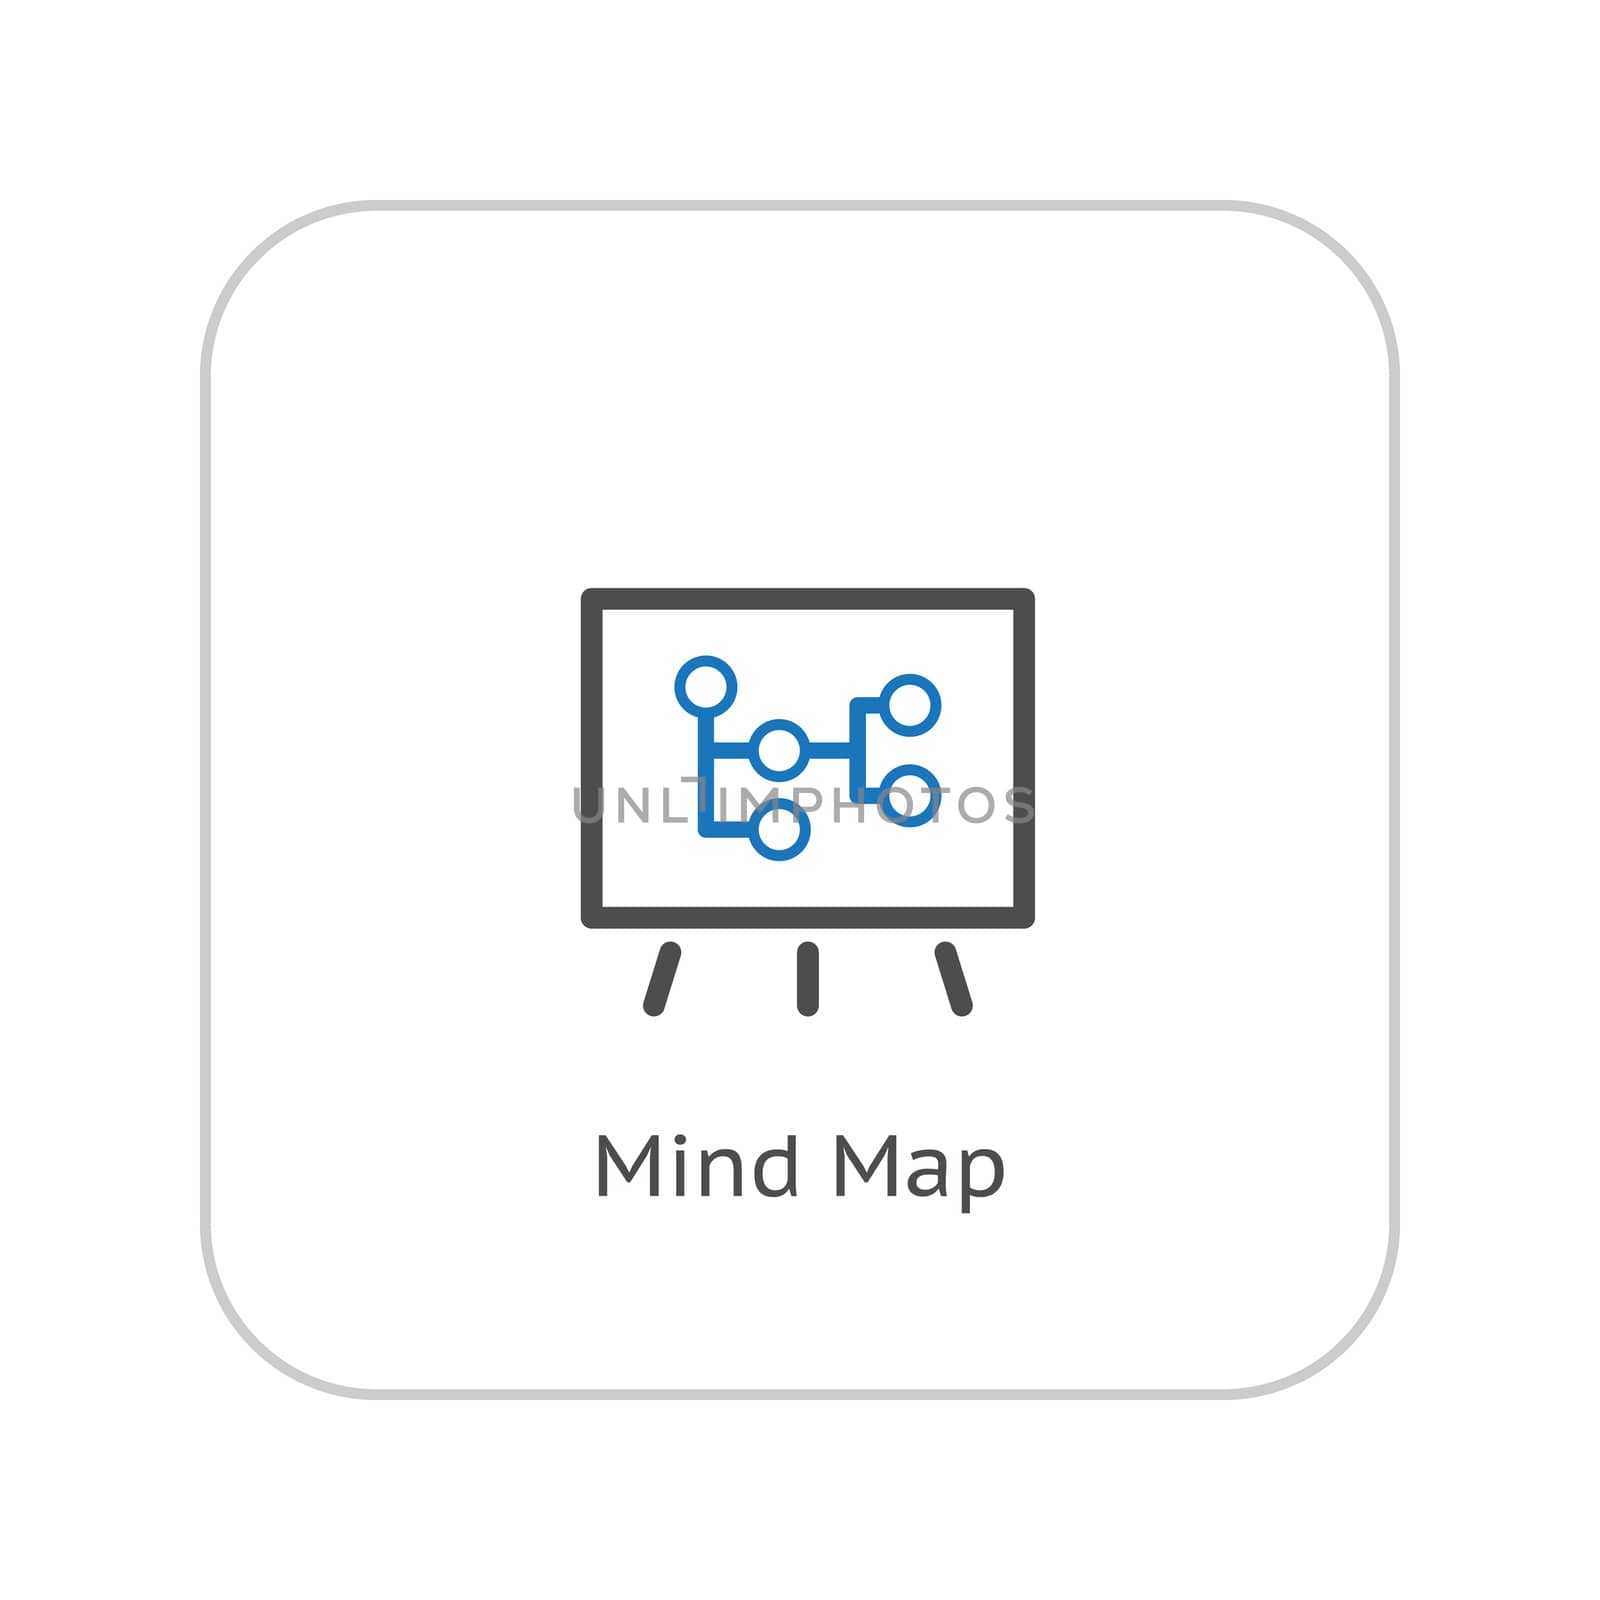 Mind Map Icon. Business Concept. Flat Design. by WaD